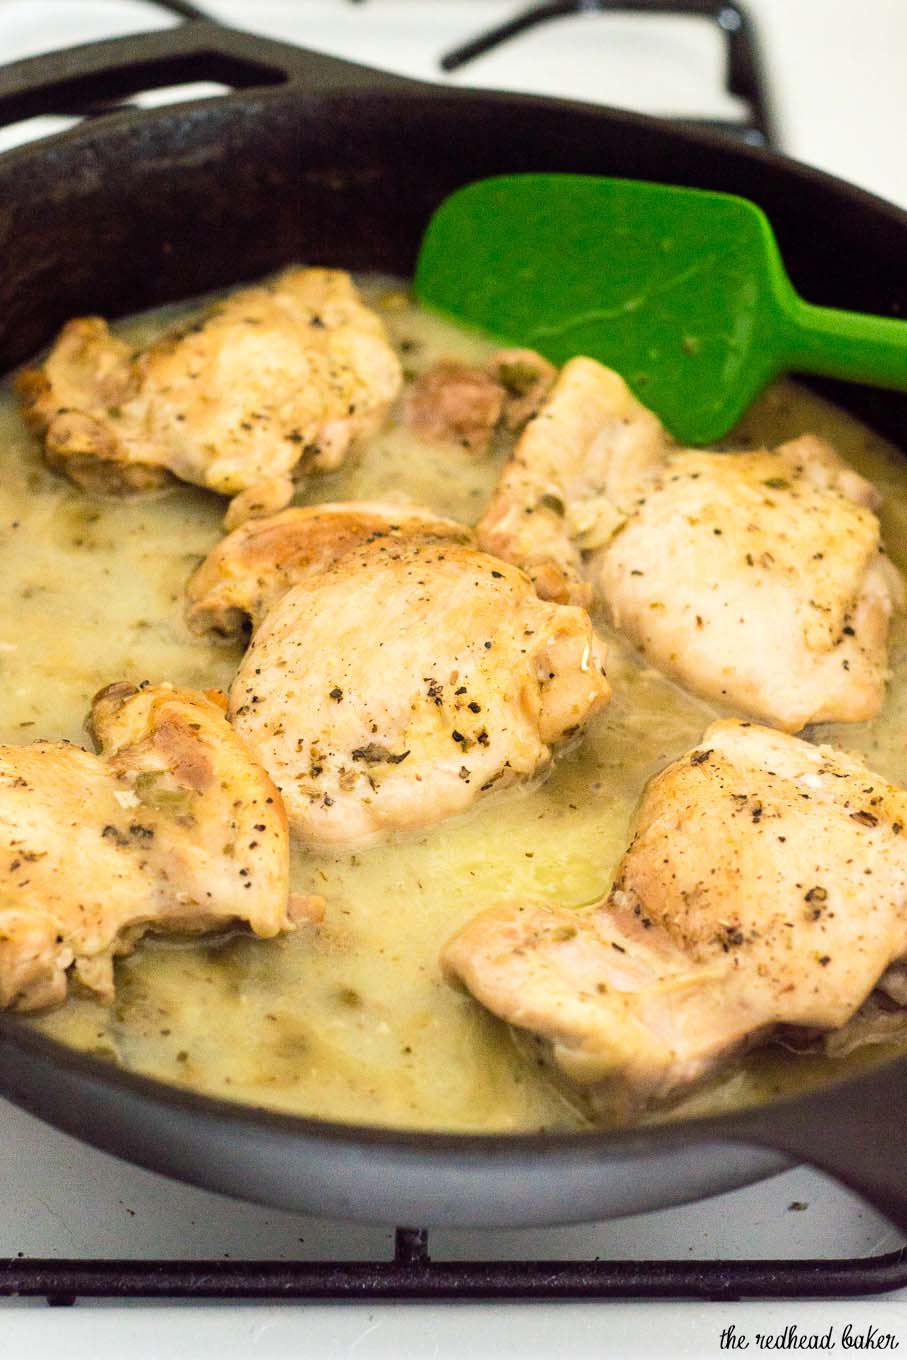 Chicken piccata, ready in under 30 minutes! This dish uses quick-cooking chicken thighs instead of pounded-thin breasts, and skips the flour coating. #SundaySupper